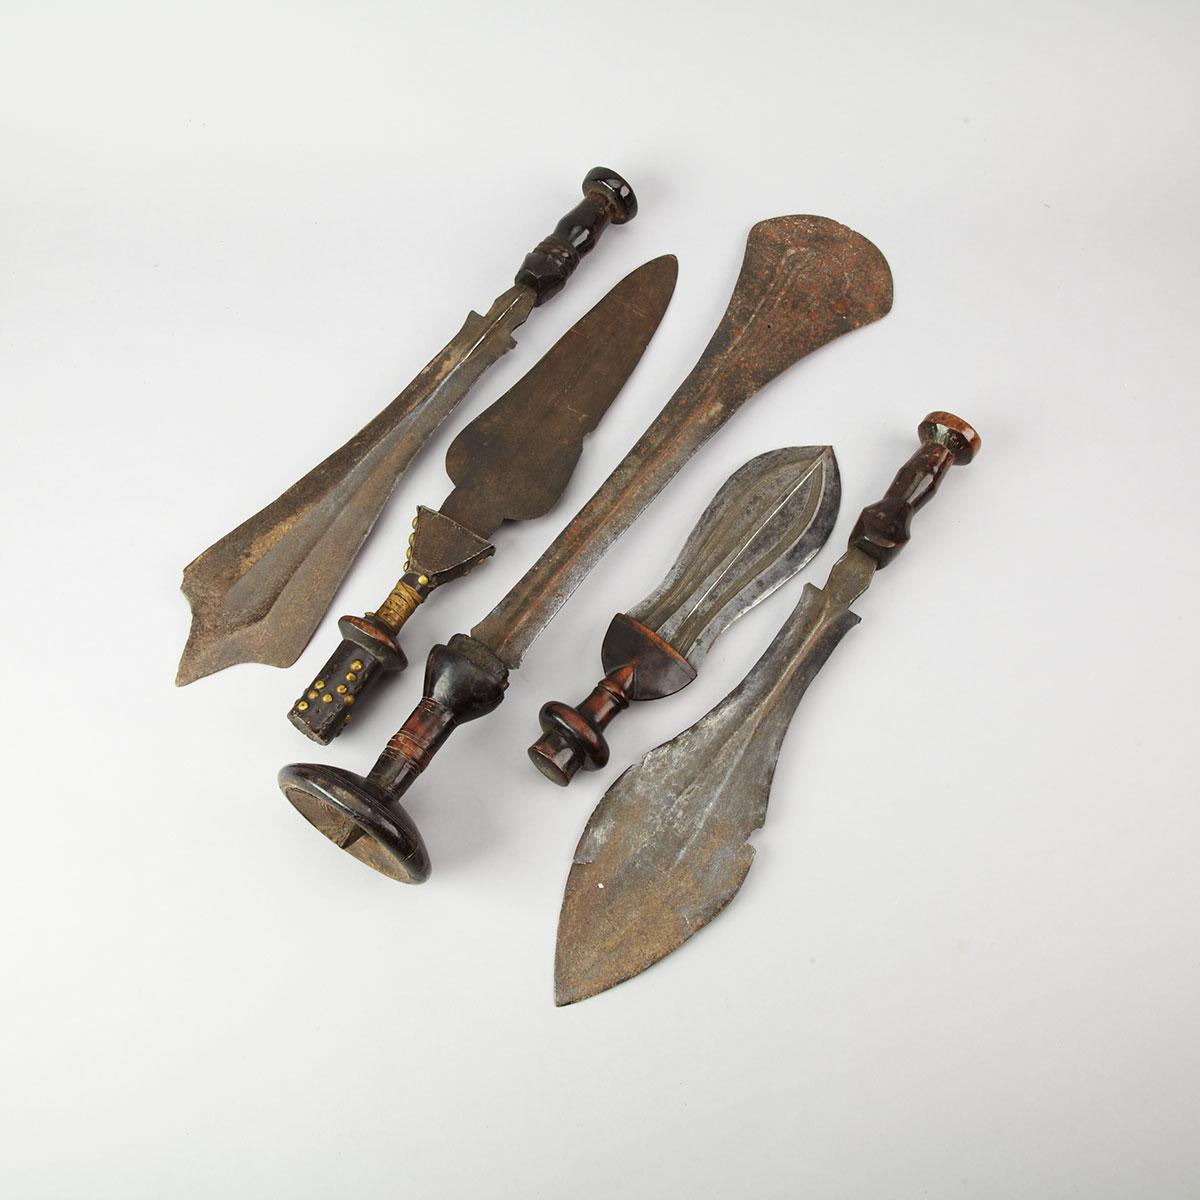 Group of FIve Double Edge Broad Knives, Upper Congo, 19th century